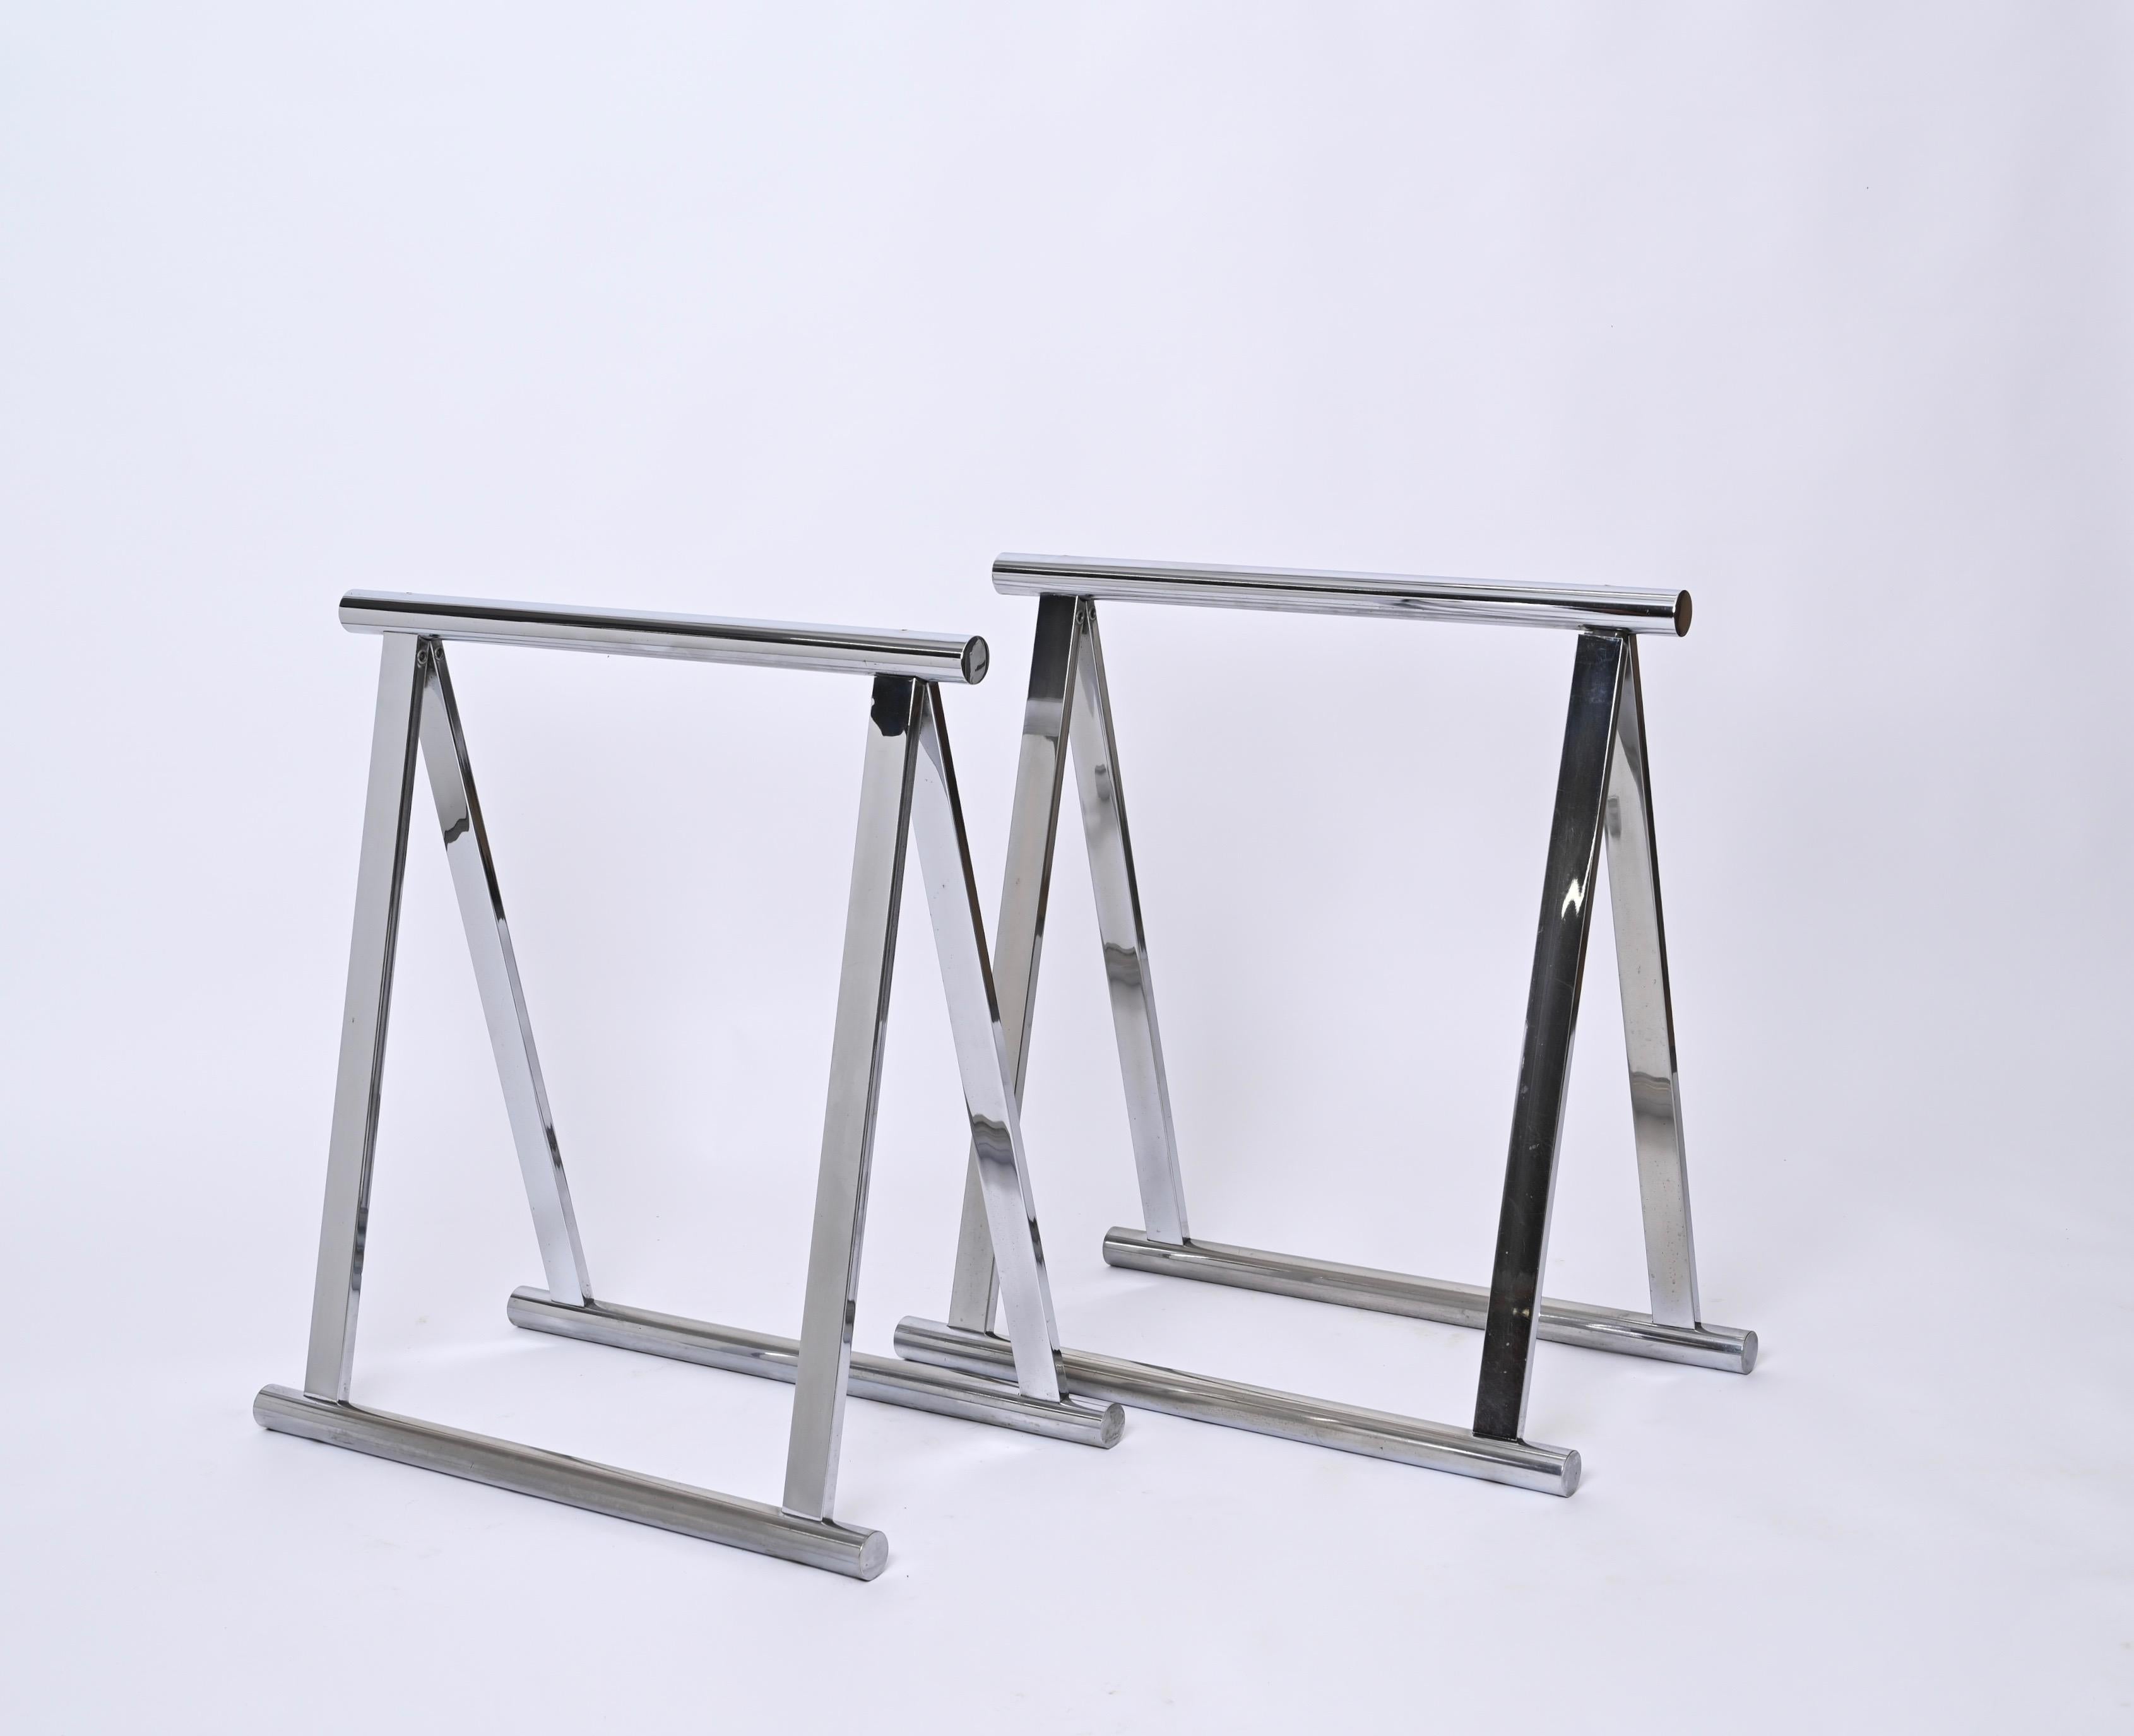 Pair of Midcentury Four-Legs Chromed Steel Italian Trestles After Baughman 1970s For Sale 1